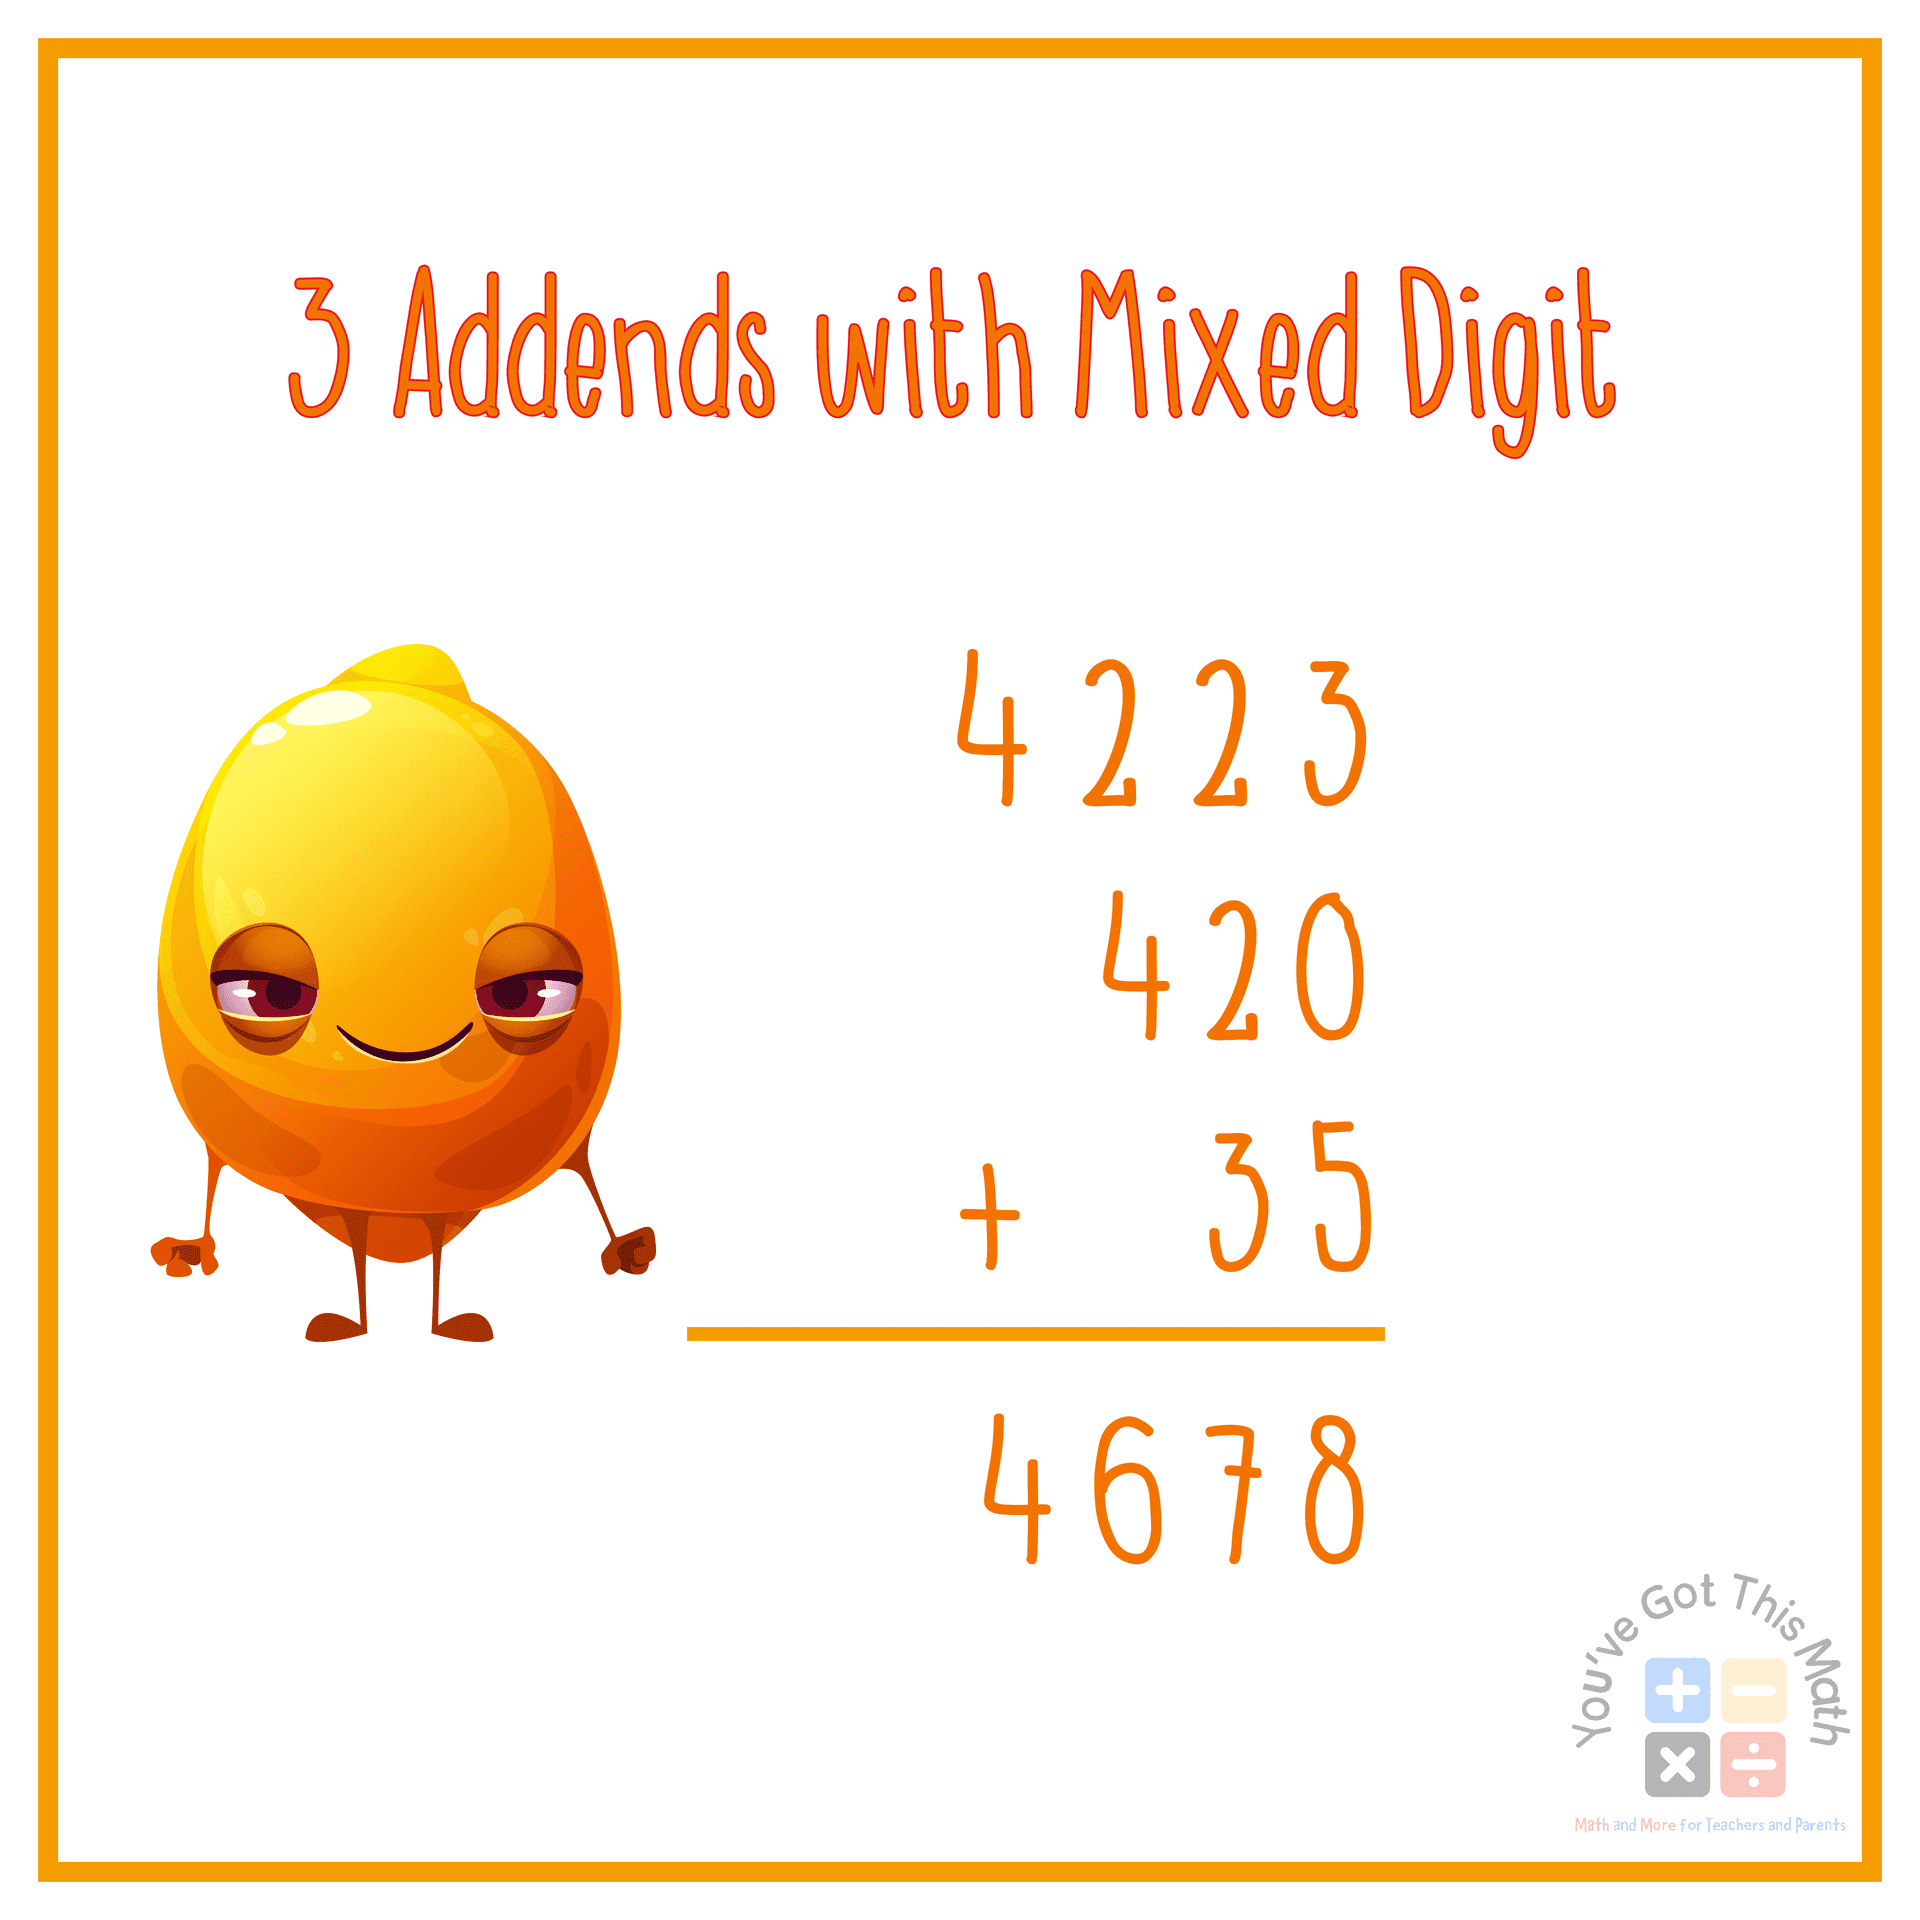 3addends with mixed digits for adding with 3 addends